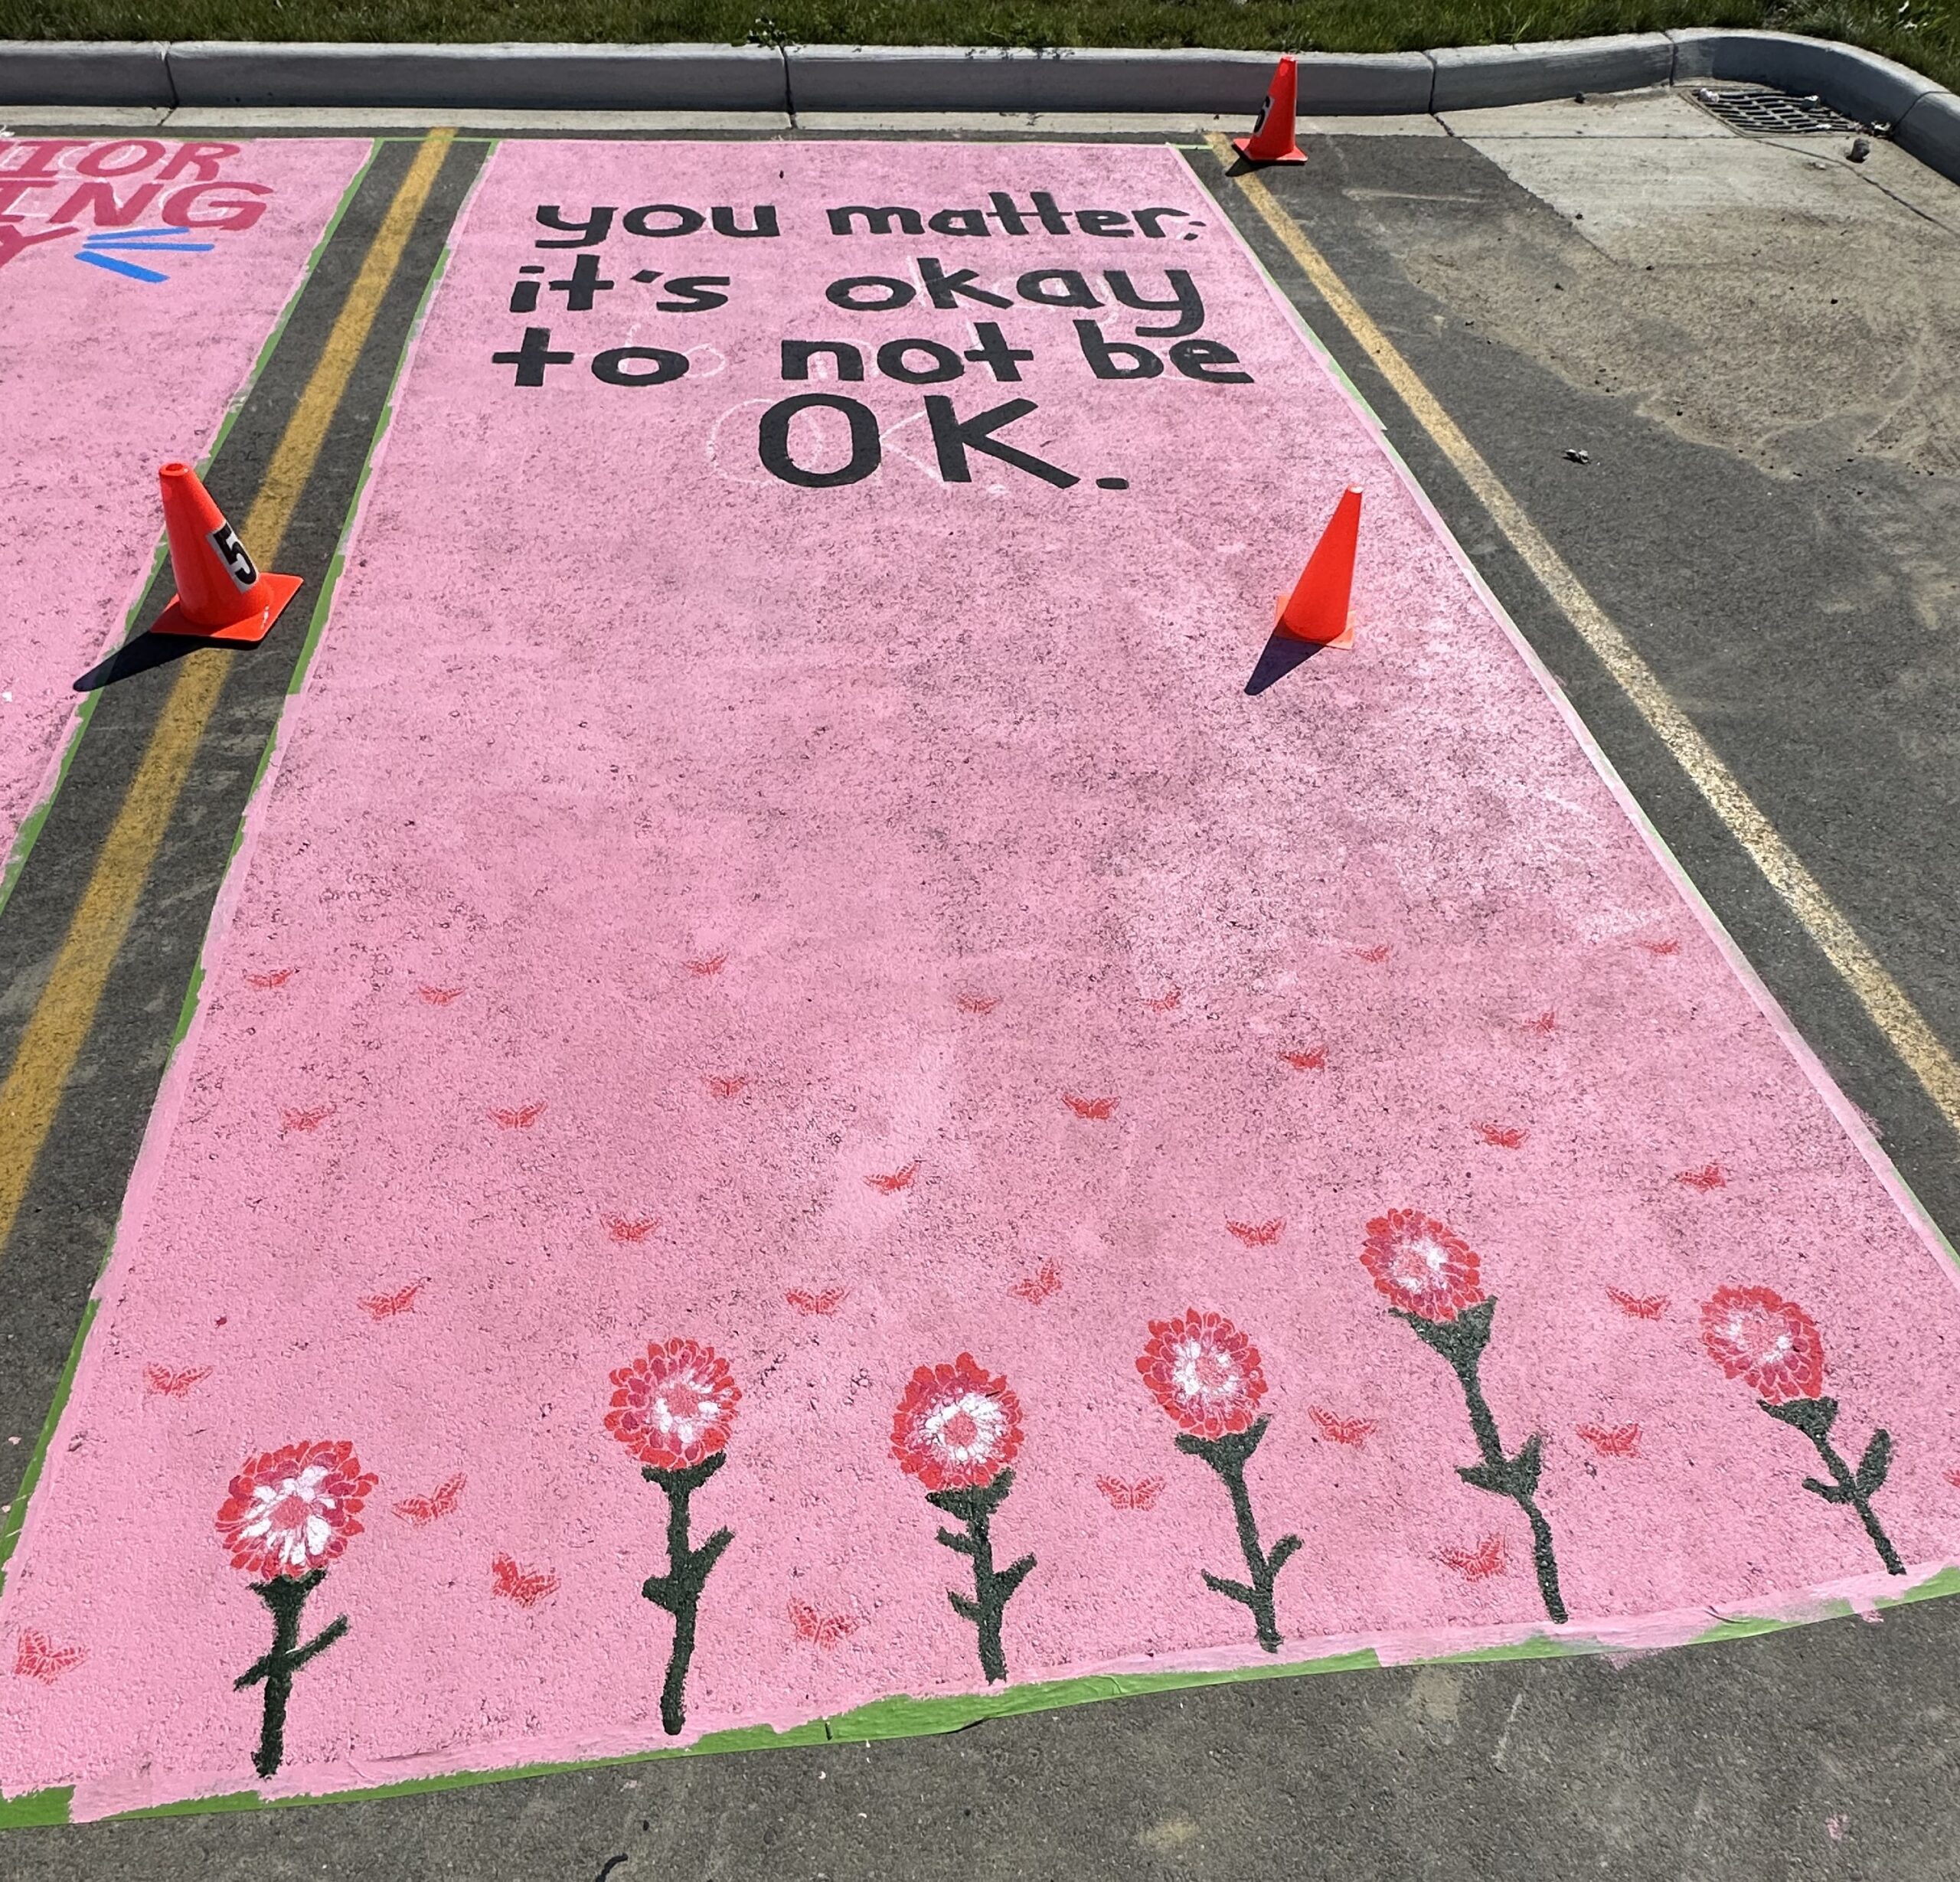 This parking space has a mental health theme